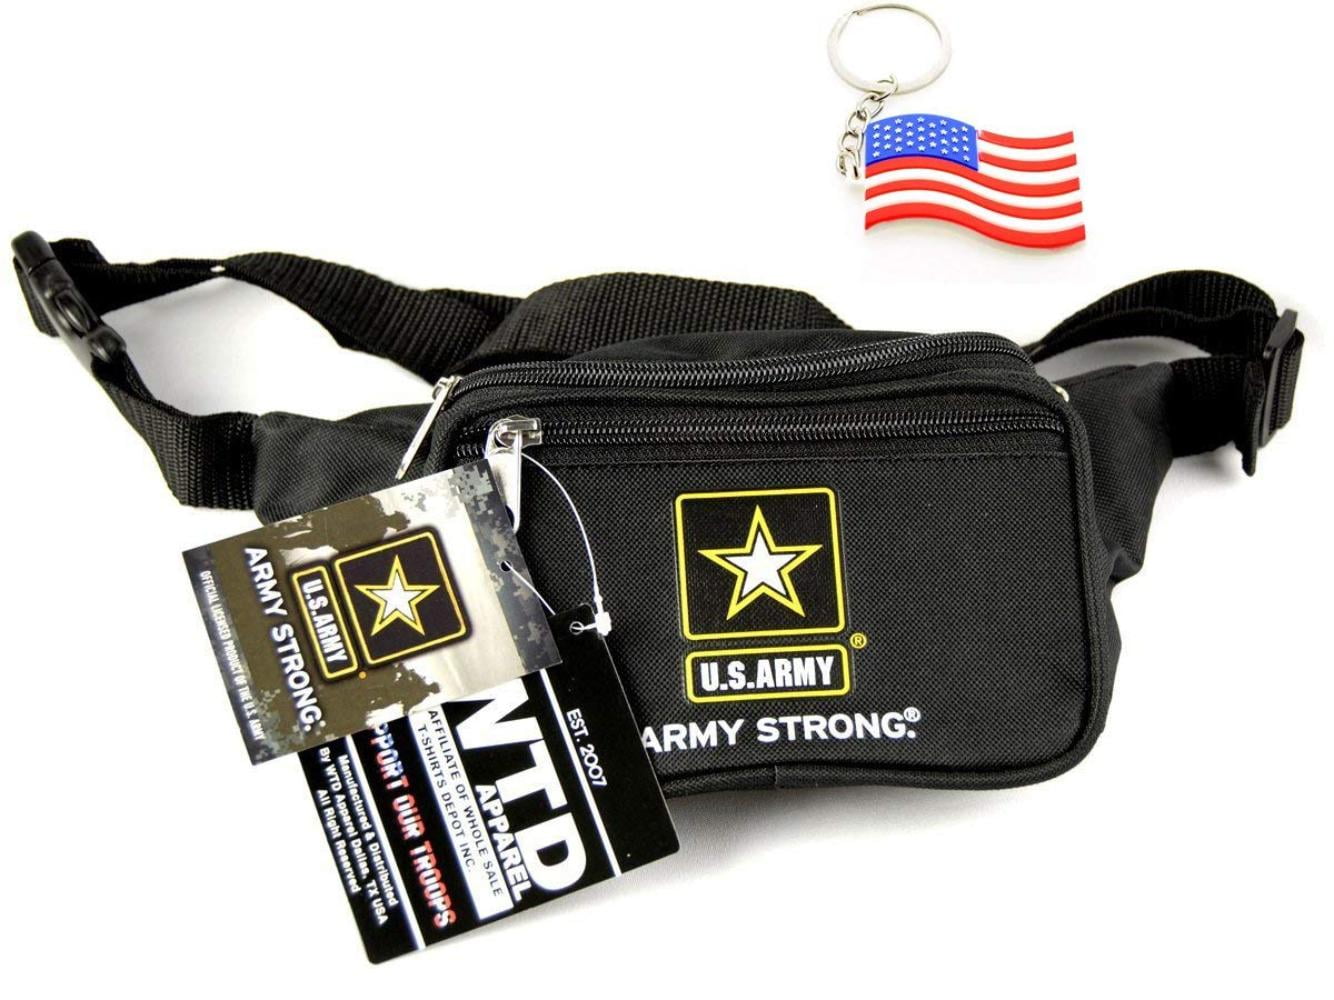 Military Official Licensed Backpack U.S